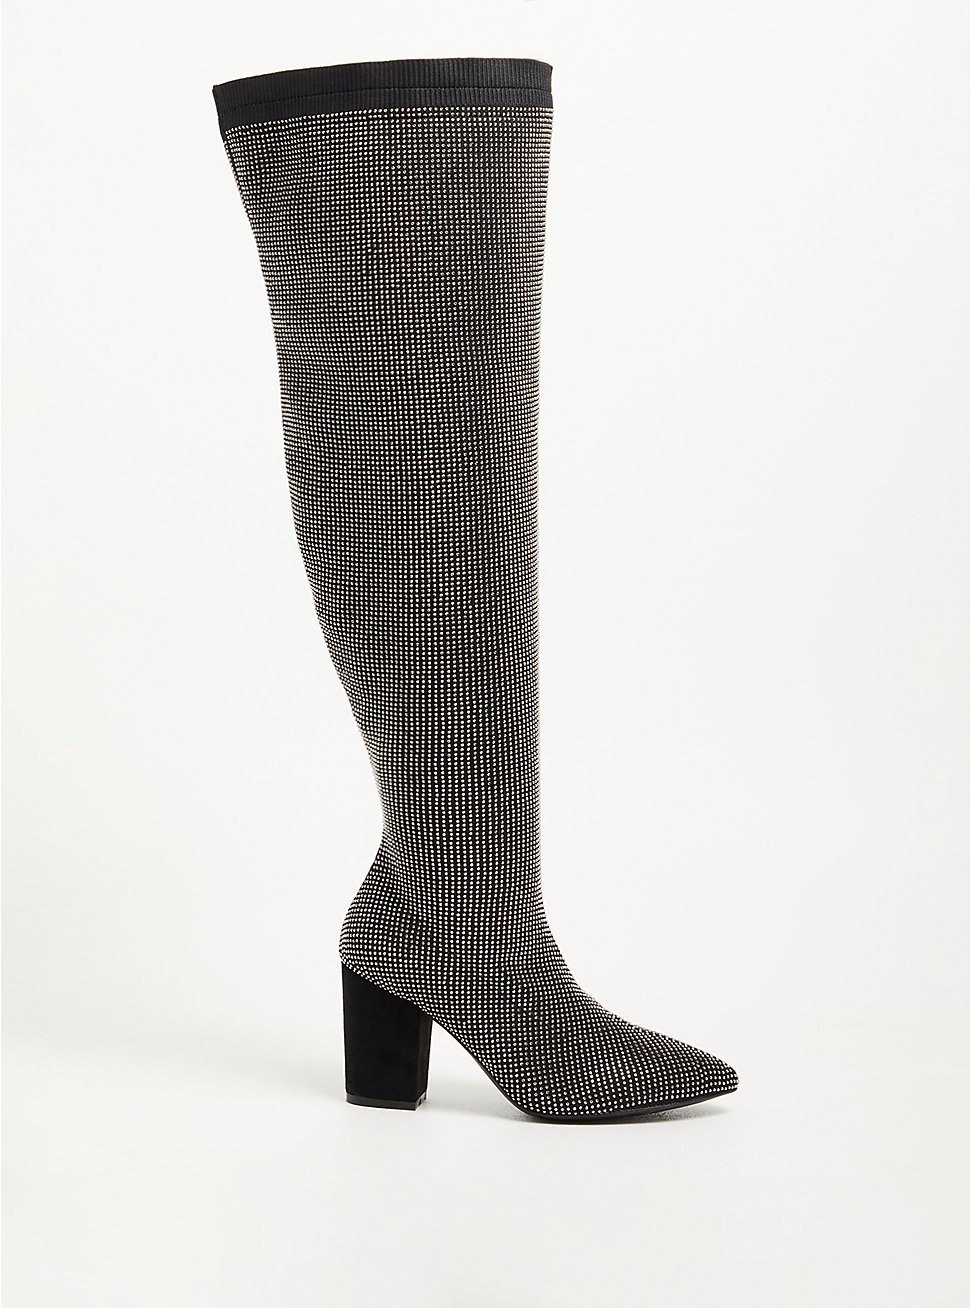 Plus Size Over The Knee Heel Boot - Stretch Knit Studded Black (WW), BLACK, hi-res